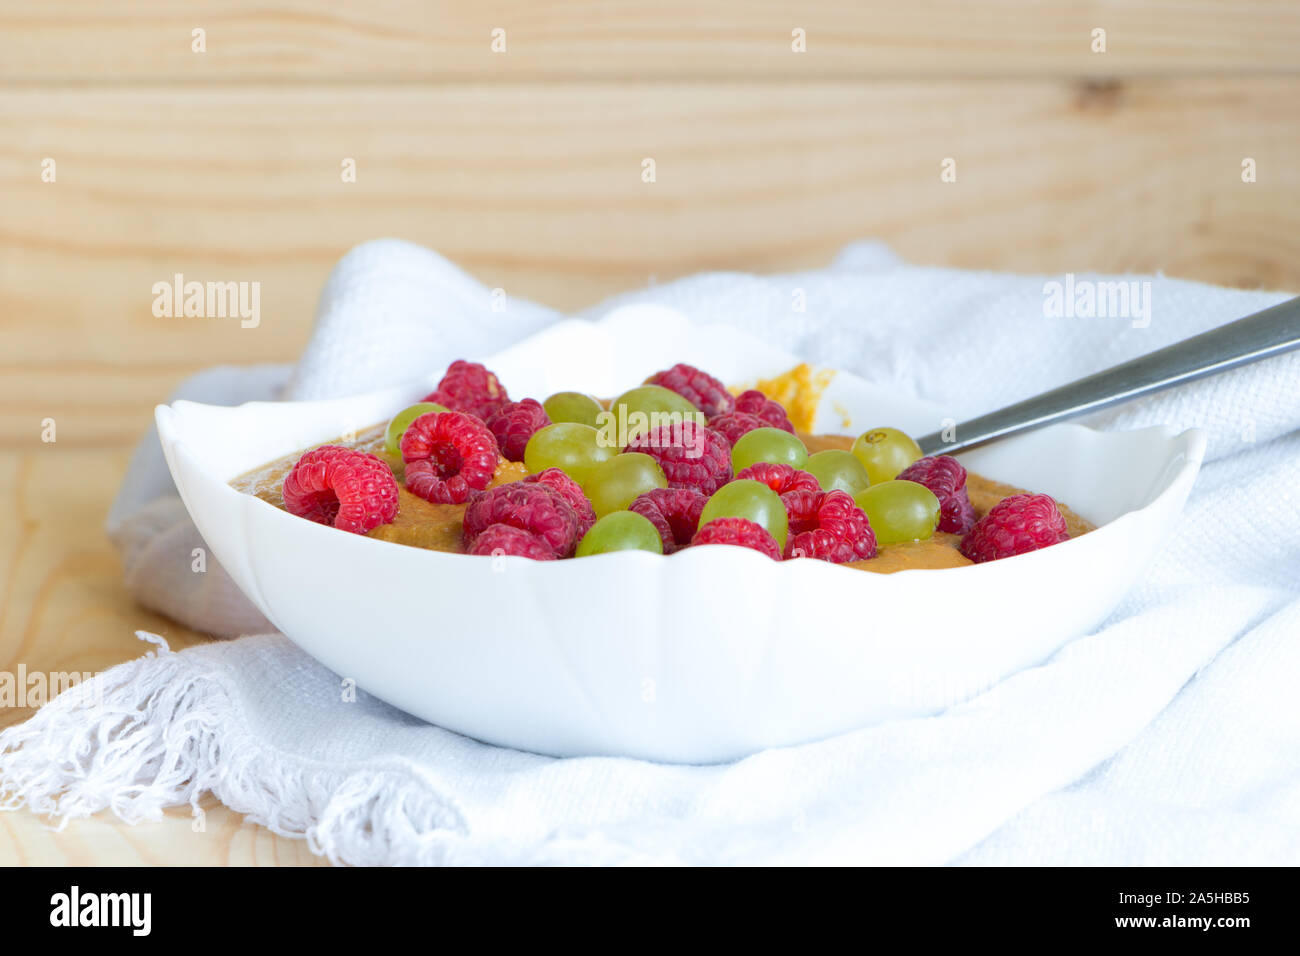 Delicious healthy raw food diet breakfast. Vegan flax porridge with raspberry and grape raisins in white bowl with spoon on linen fabric. Close-up Stock Photo